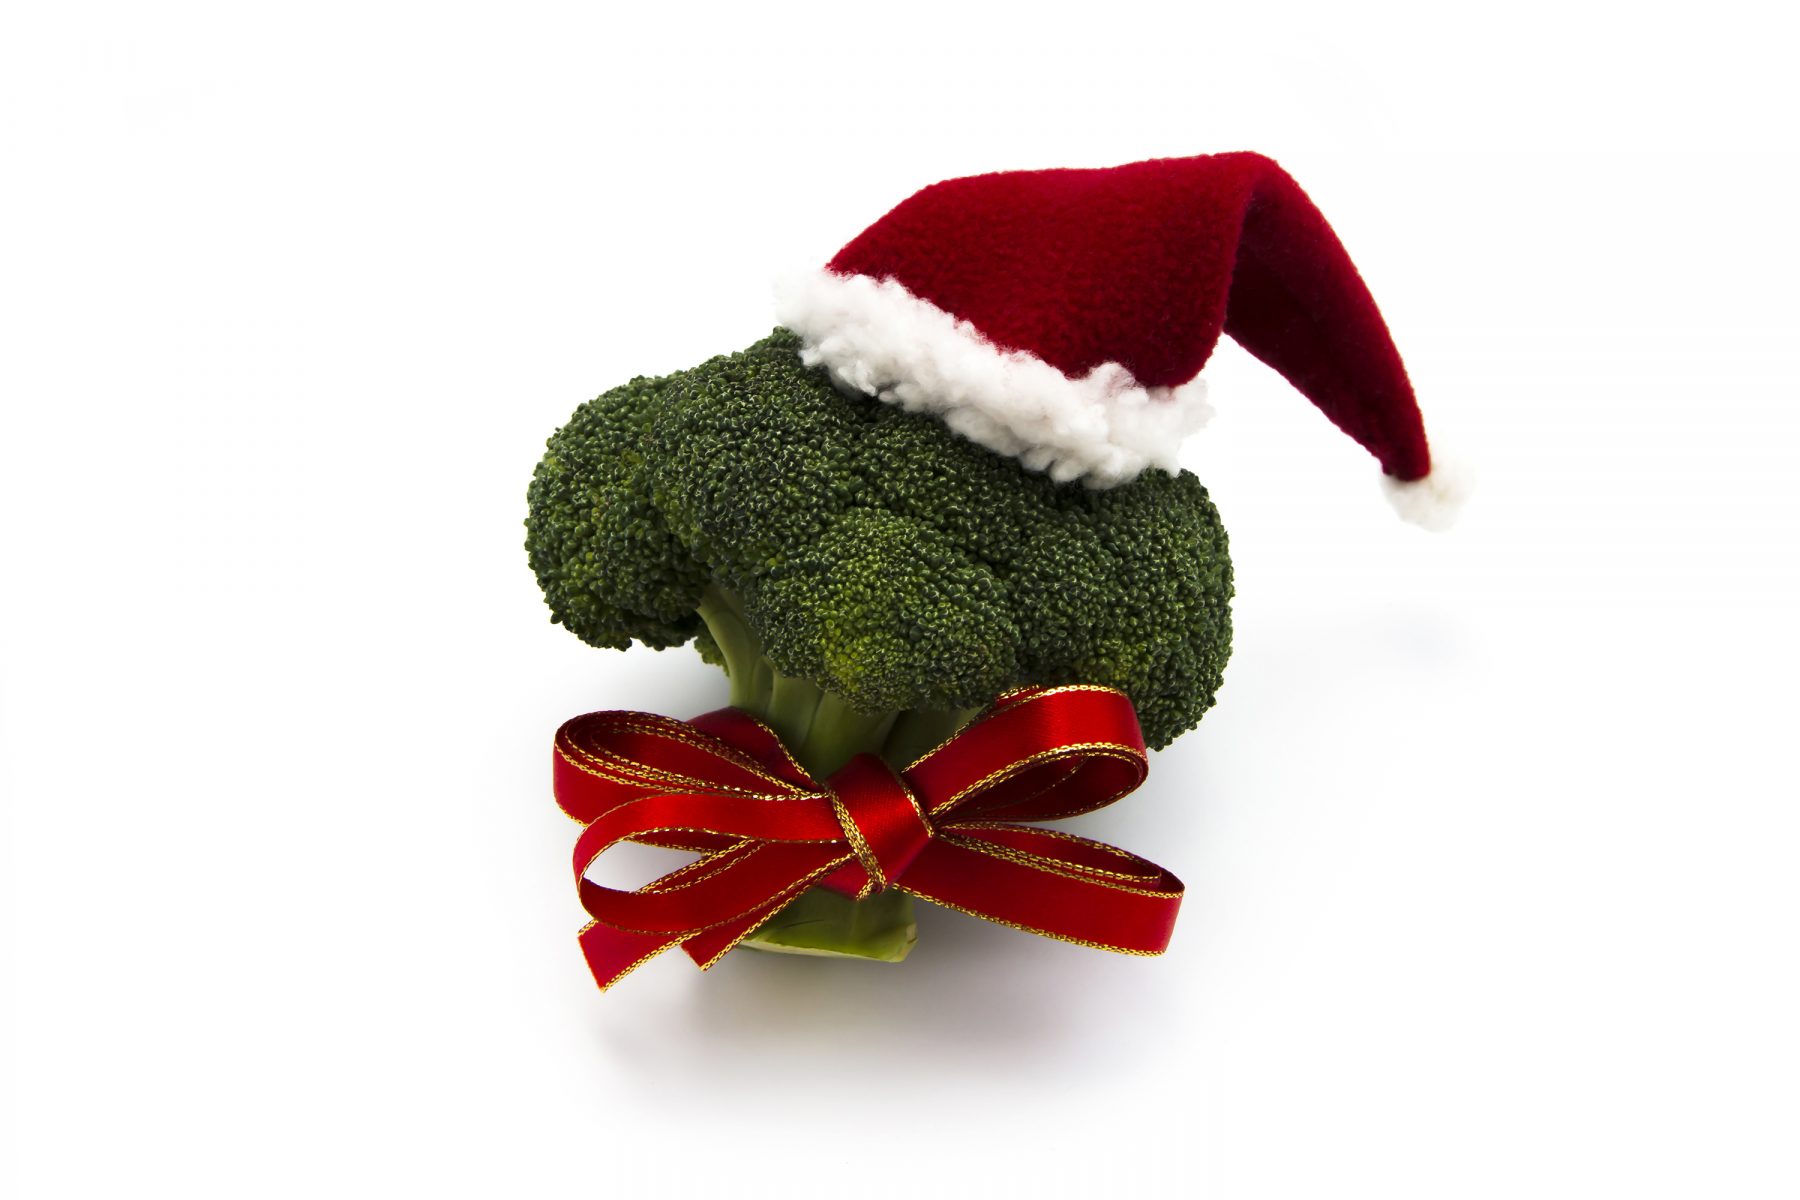 Healthy Christmas showing broccoli wearing a Christmas hat and ribbon